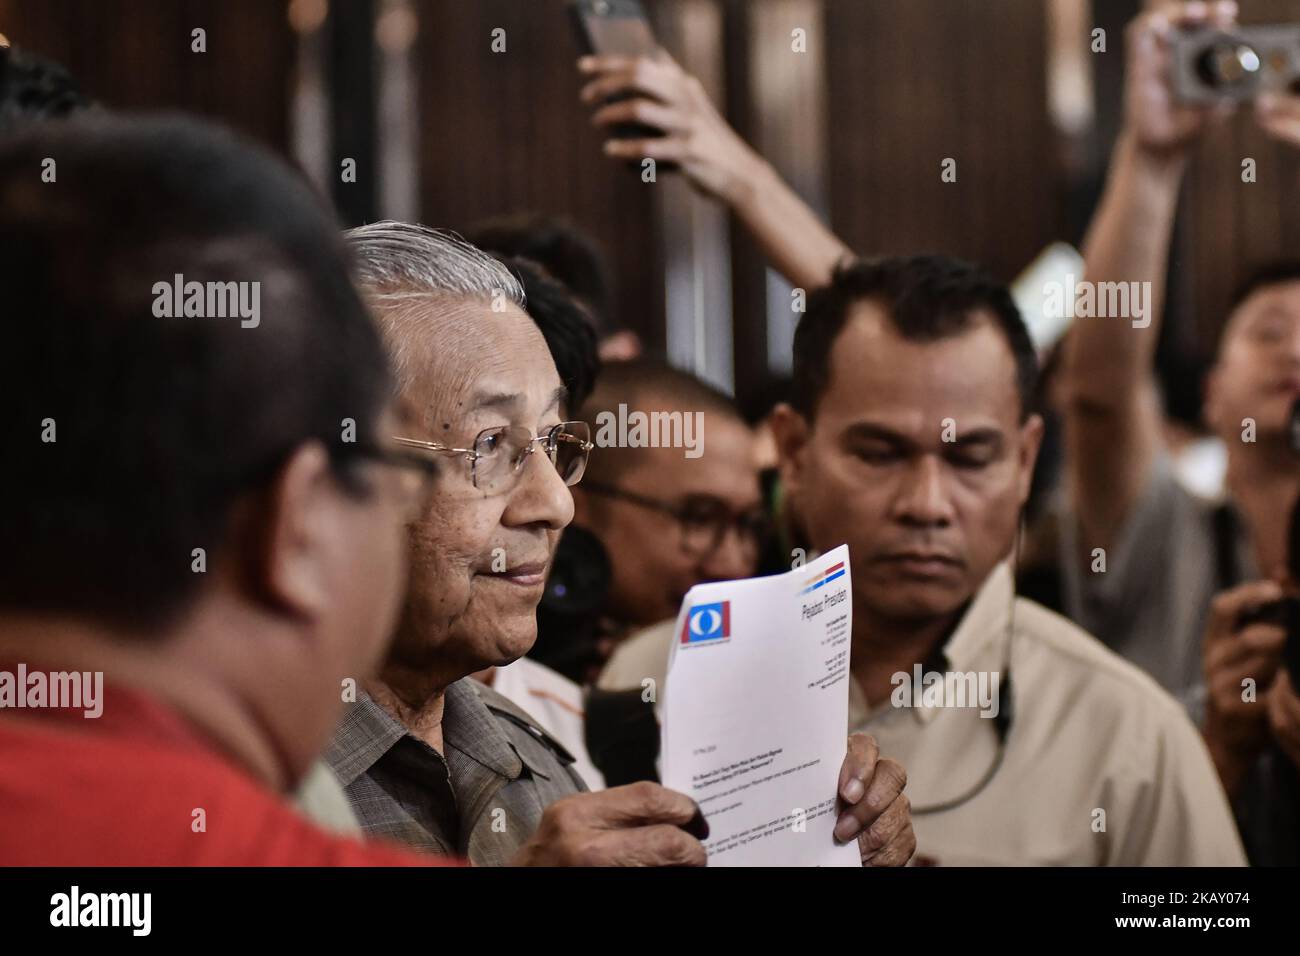 Malaysia Prime Minister, Tun Dr. Mahathir Mohamad shows endorsed letter to media members during a press conference at Sheraton Hotel in Petaling Jaya, Selangor on May 10, 2018. (Photo by Muhammad Shahrizal/NurPhoto) Stock Photo